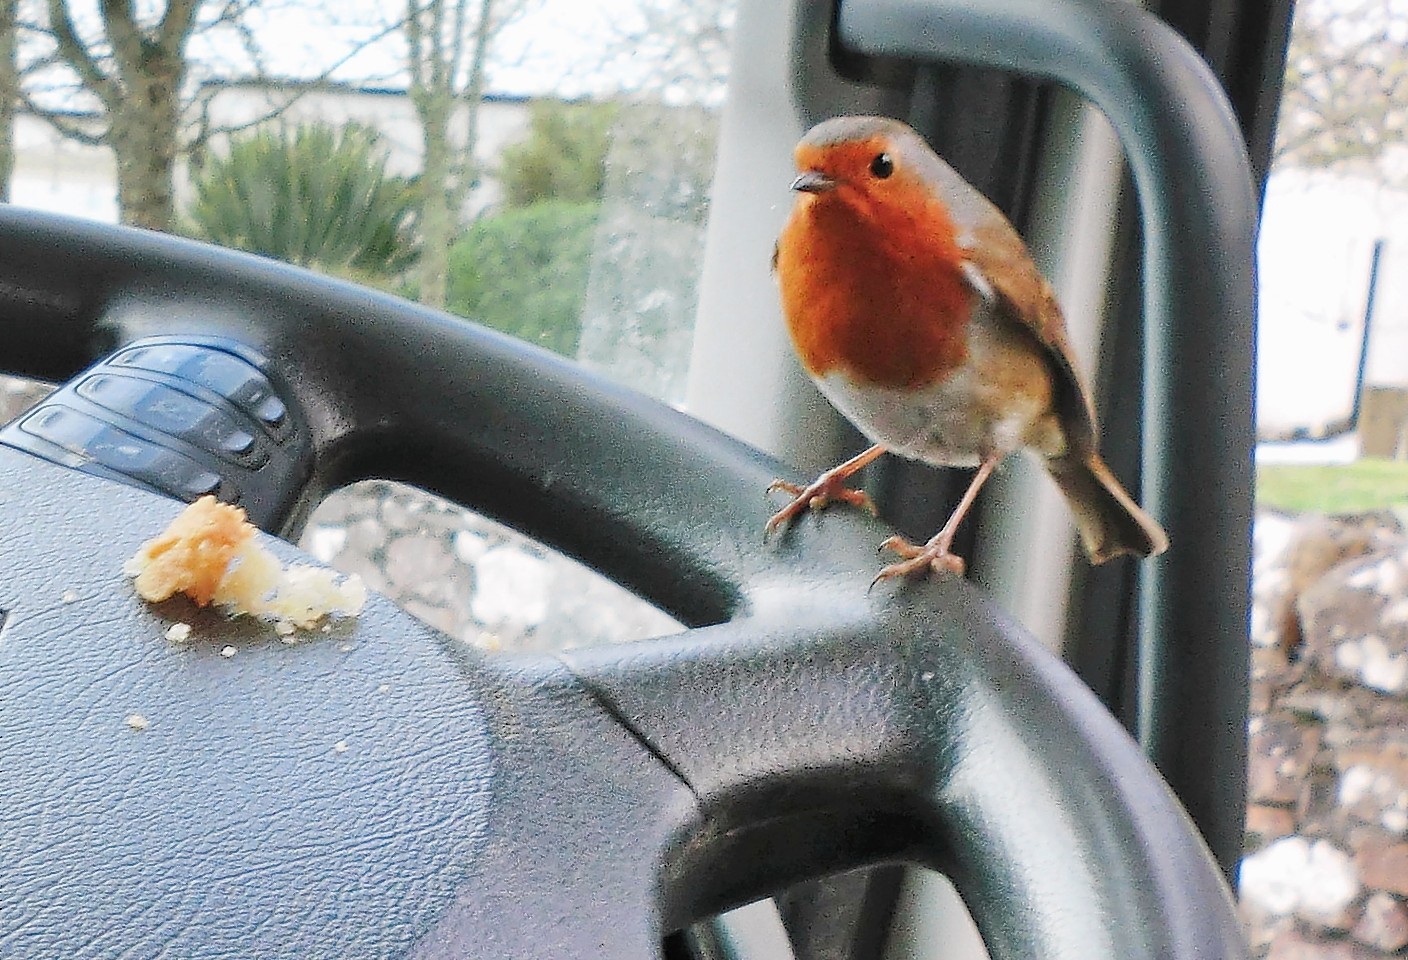 A lorry driver has made friends with a robin